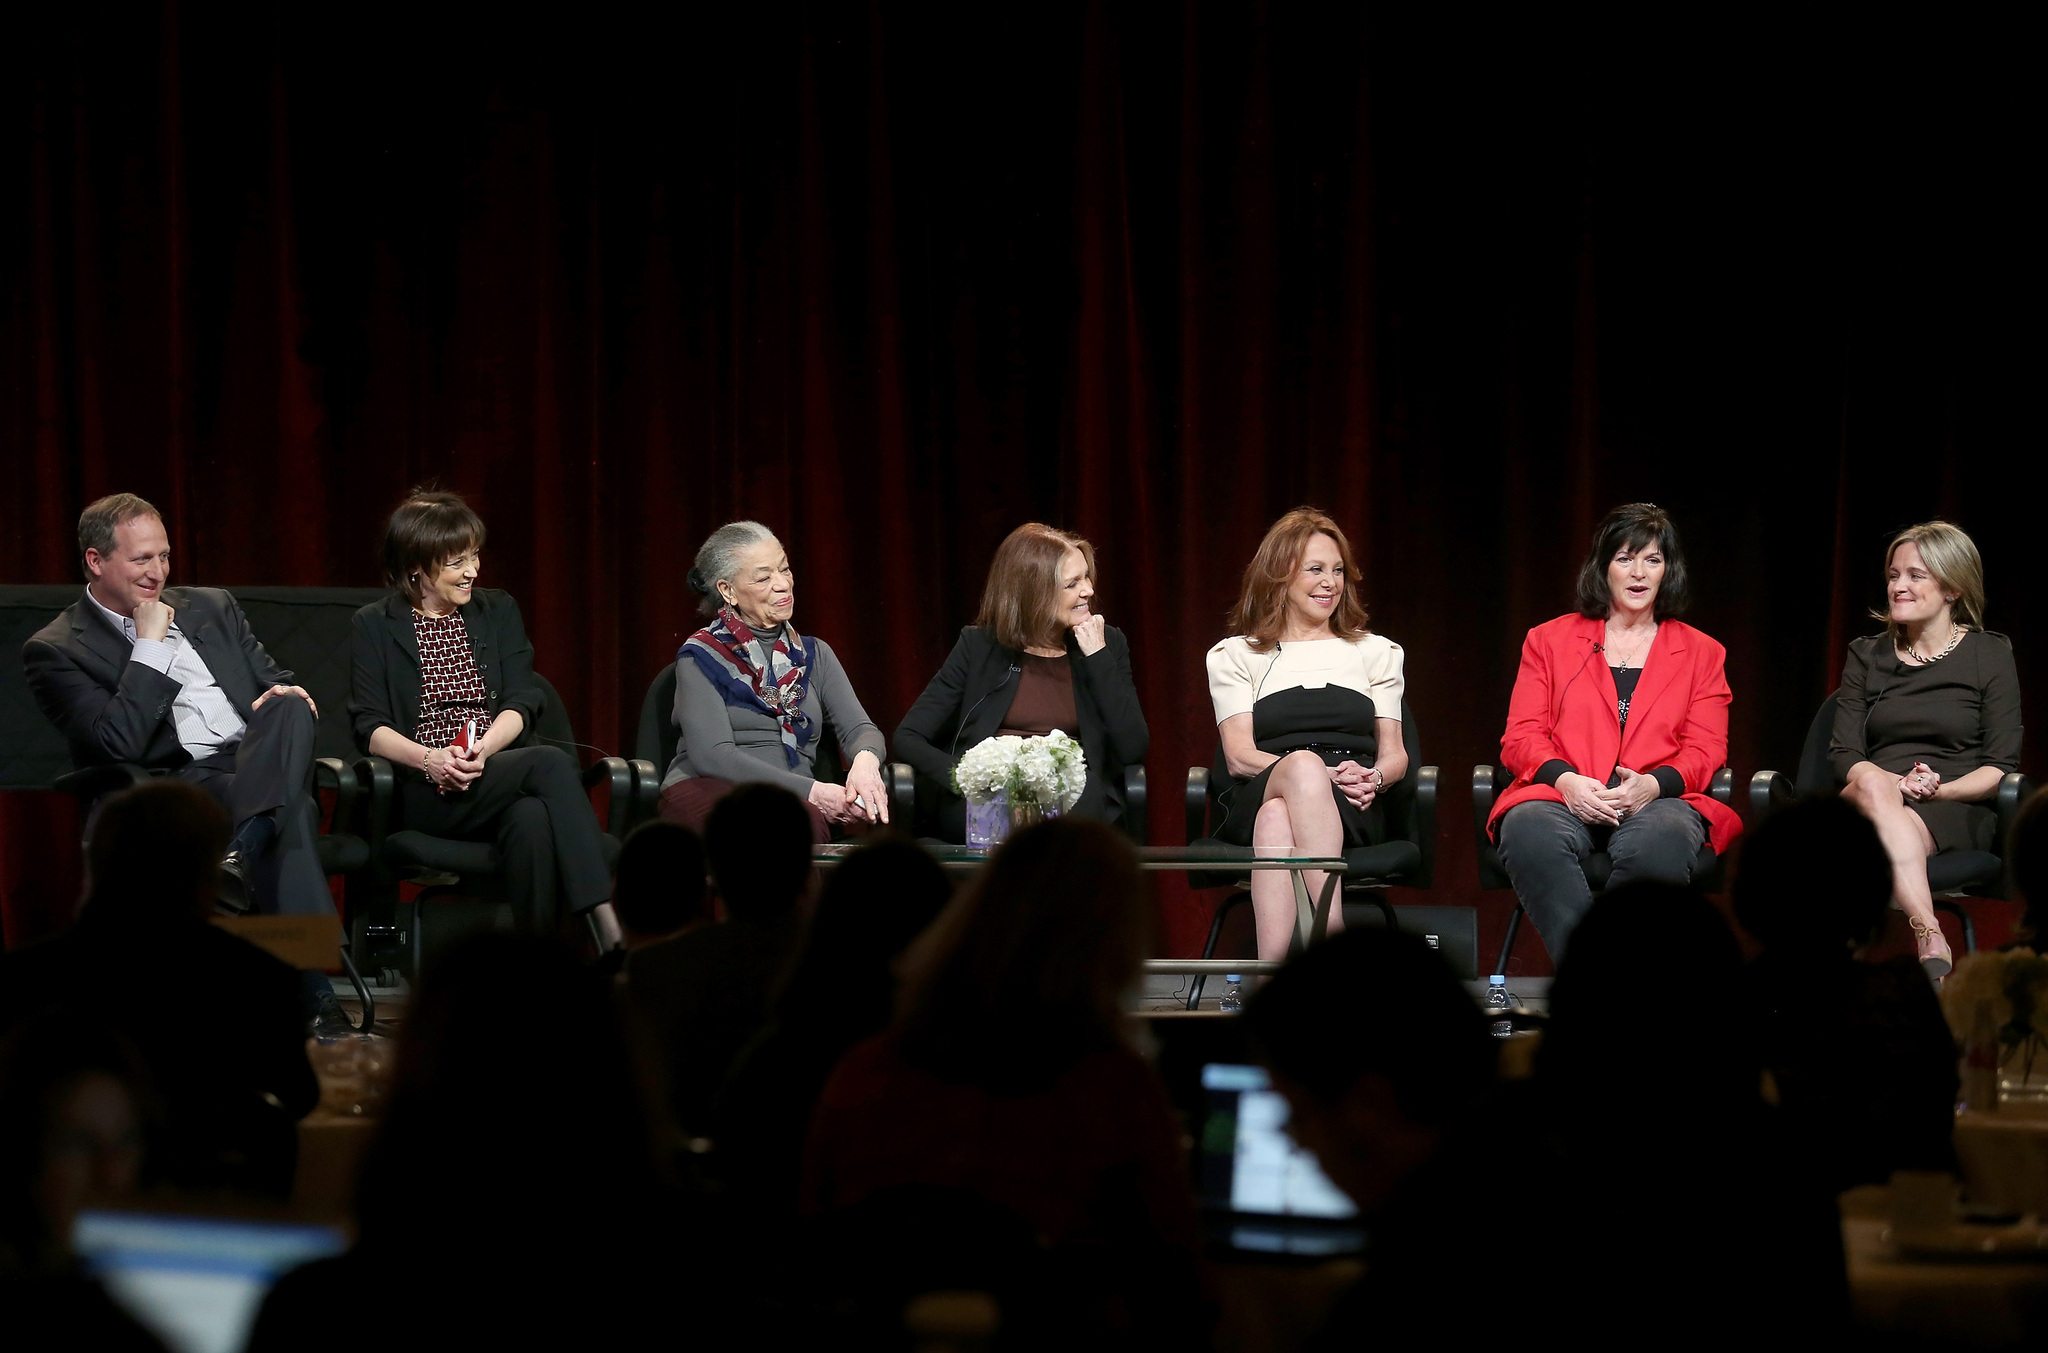 Marlo Thomas, Barak Goodman, Gloria Steinem, Dyllan McGee and Betsy West at event of Makers: Women Who Make America (2013)